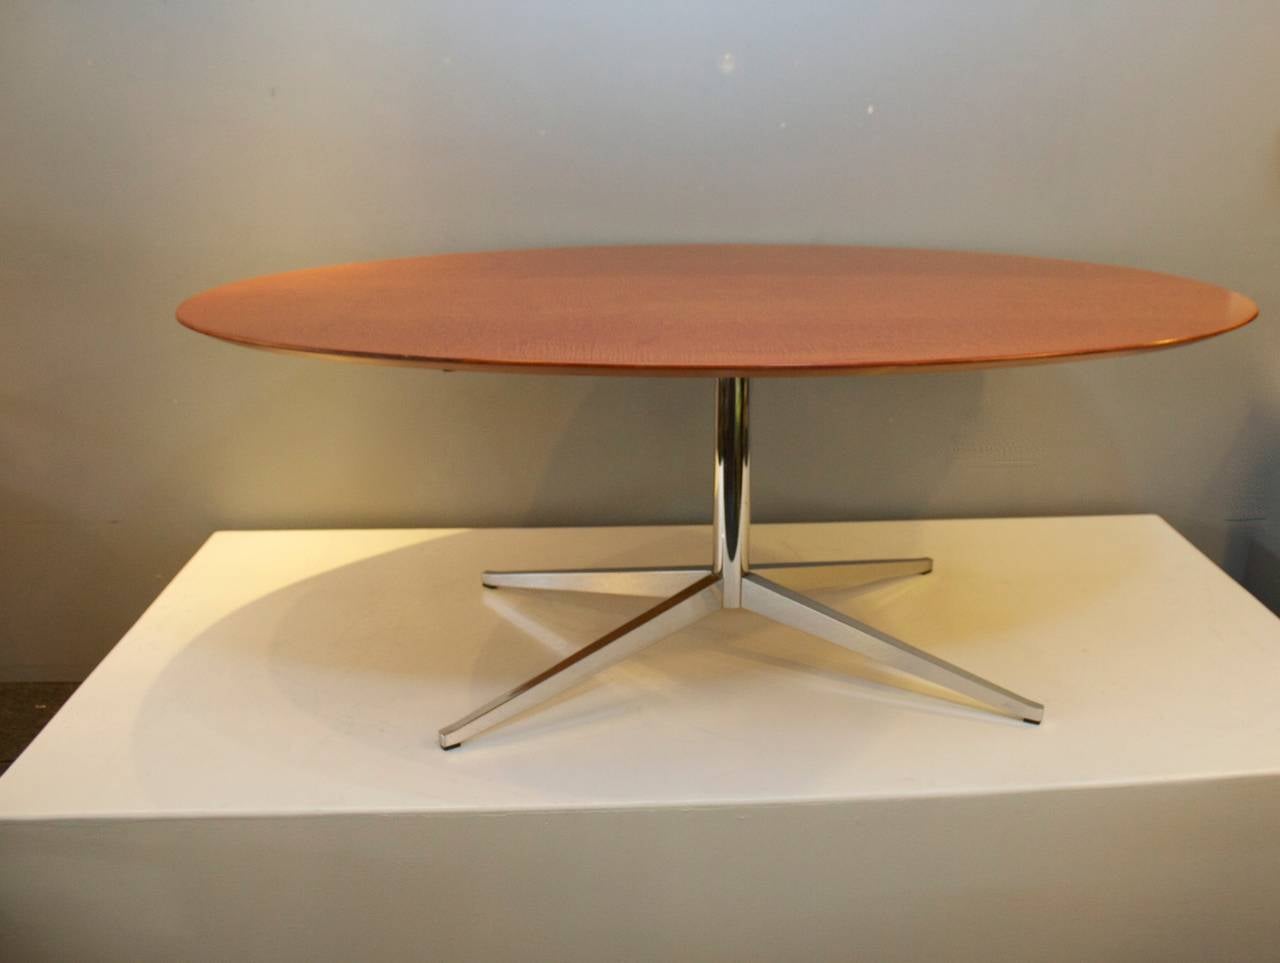 Uncommon, beautiful, special-order Burl wood (possibly Red Juniper) Table/Desk. timeless design by Florence Knoll, 78